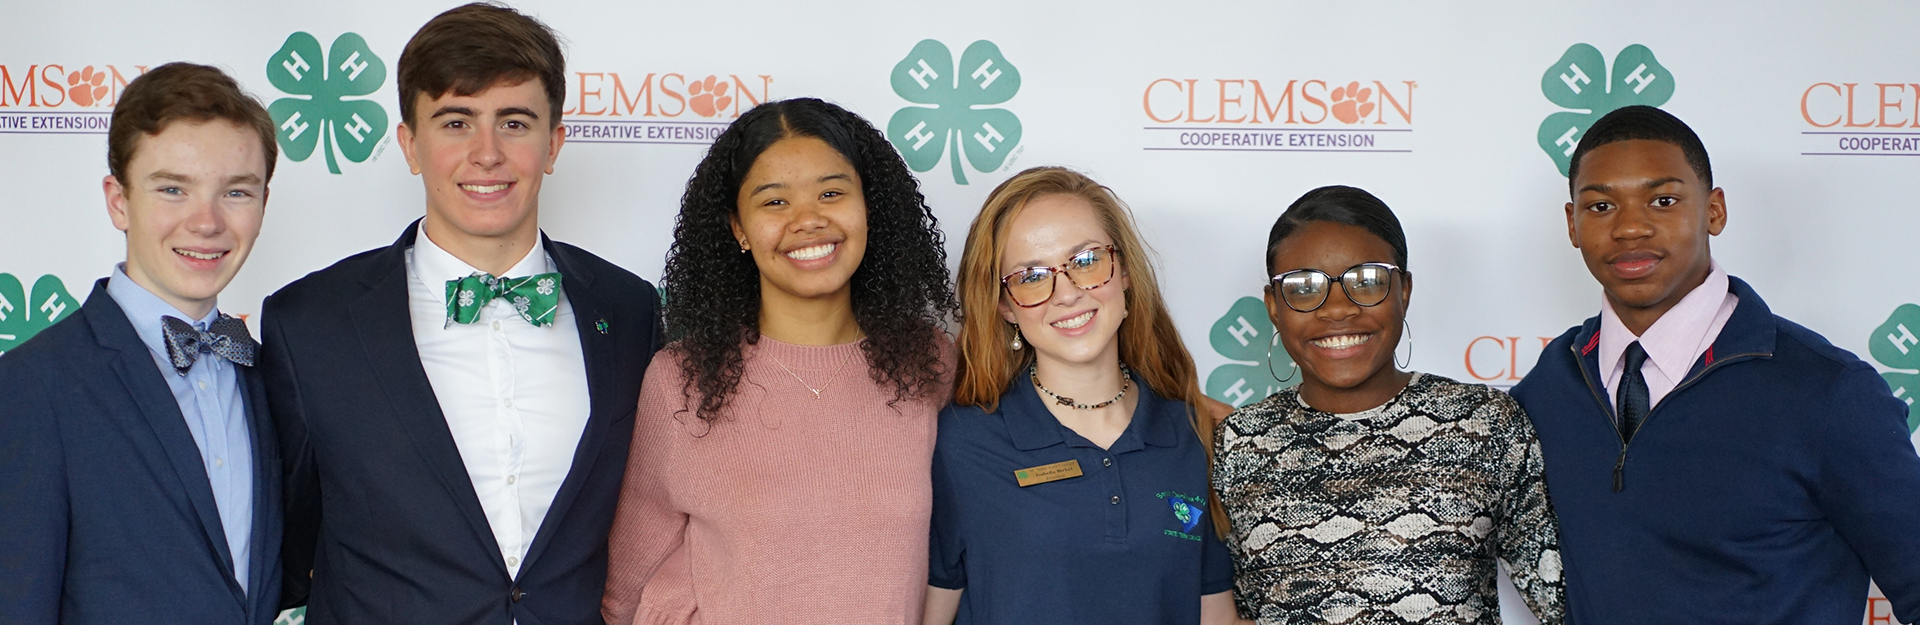 4-H students smiling